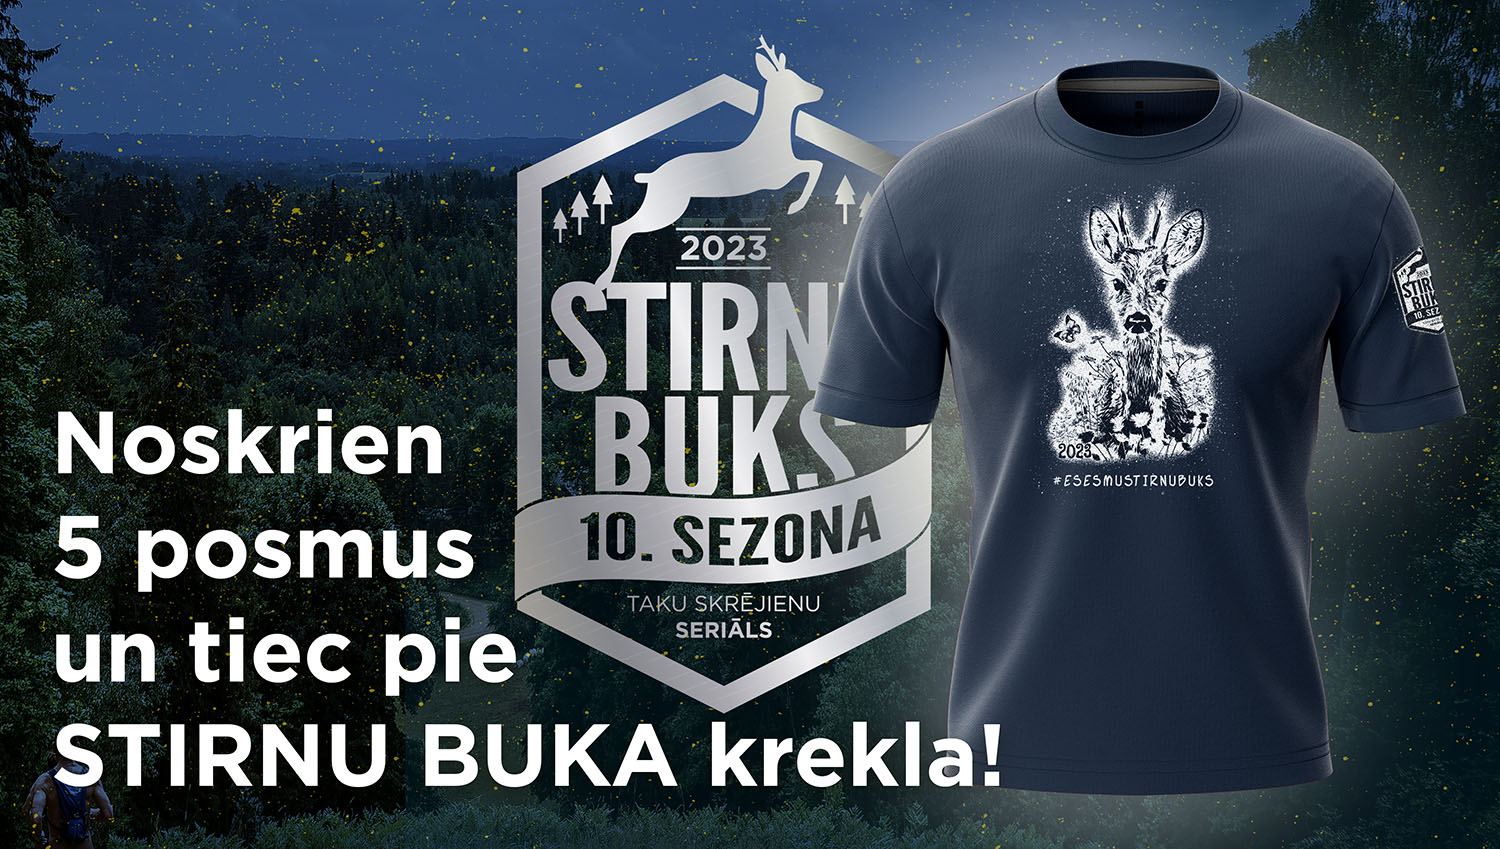 Stirnubuks.lv - Complete five stages of “Stirnu buks” and receive the special anniversary season running shirt